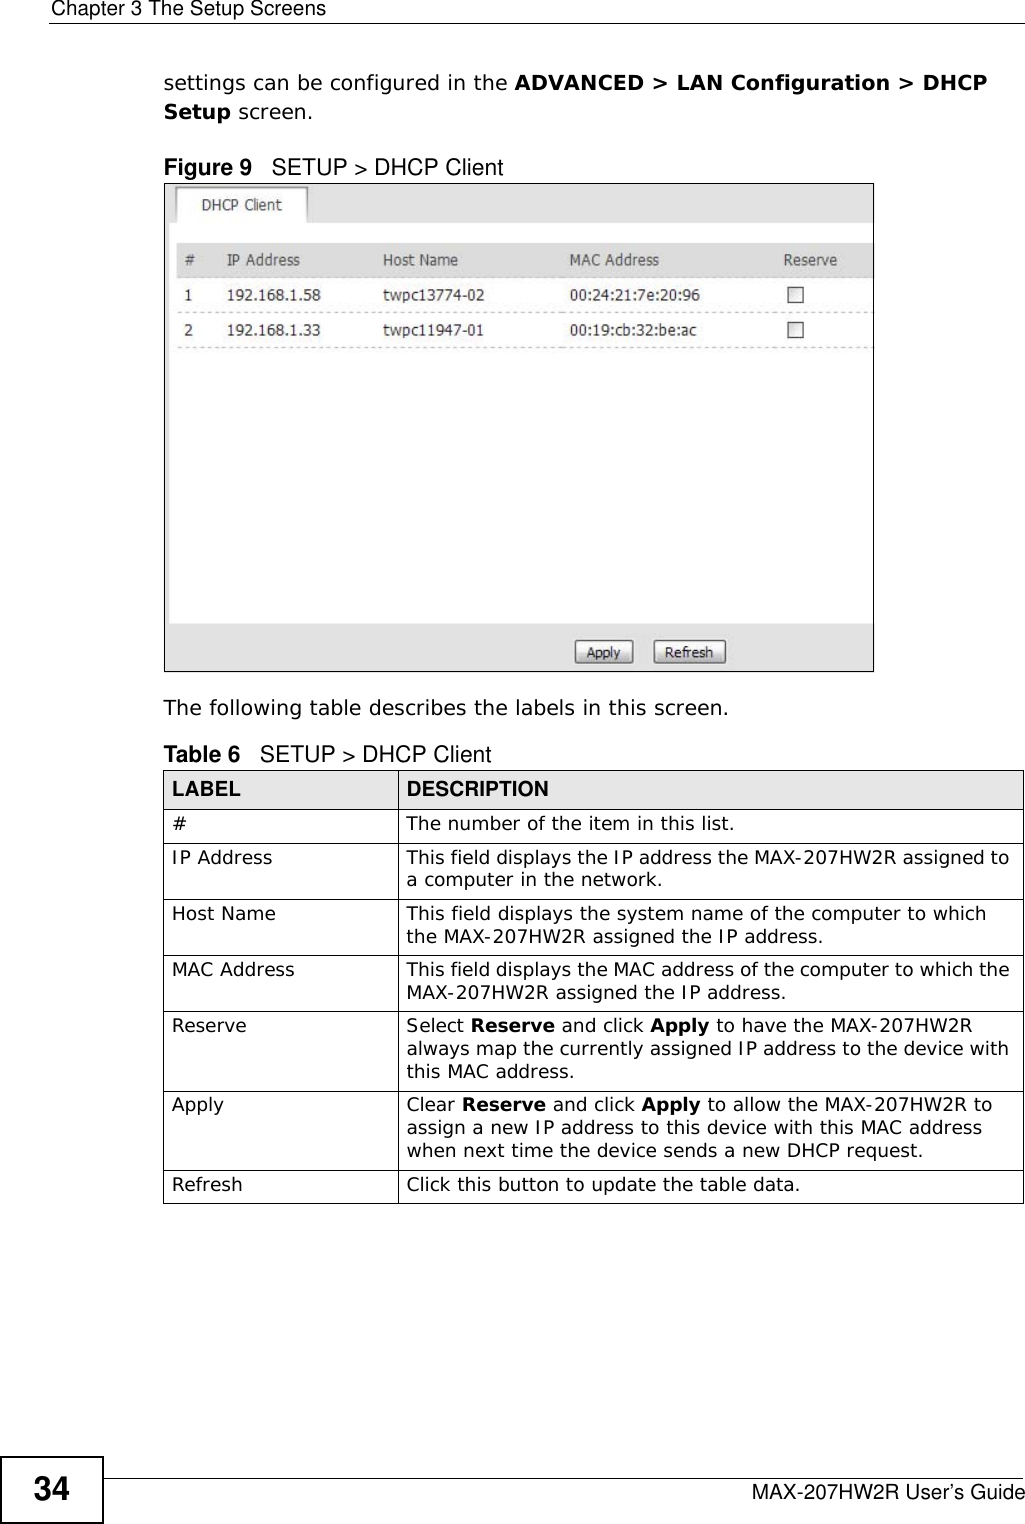 Chapter 3 The Setup ScreensMAX-207HW2R User’s Guide34settings can be configured in the ADVANCED &gt; LAN Configuration &gt; DHCP Setup screen.Figure 9   SETUP &gt; DHCP ClientThe following table describes the labels in this screen. Table 6   SETUP &gt; DHCP ClientLABEL DESCRIPTION# The number of the item in this list.IP Address This field displays the IP address the MAX-207HW2R assigned to a computer in the network.Host Name This field displays the system name of the computer to which the MAX-207HW2R assigned the IP address.MAC Address This field displays the MAC address of the computer to which the MAX-207HW2R assigned the IP address.Reserve Select Reserve and click Apply to have the MAX-207HW2R always map the currently assigned IP address to the device with this MAC address.Apply Clear Reserve and click Apply to allow the MAX-207HW2R to assign a new IP address to this device with this MAC address when next time the device sends a new DHCP request.Refresh Click this button to update the table data.